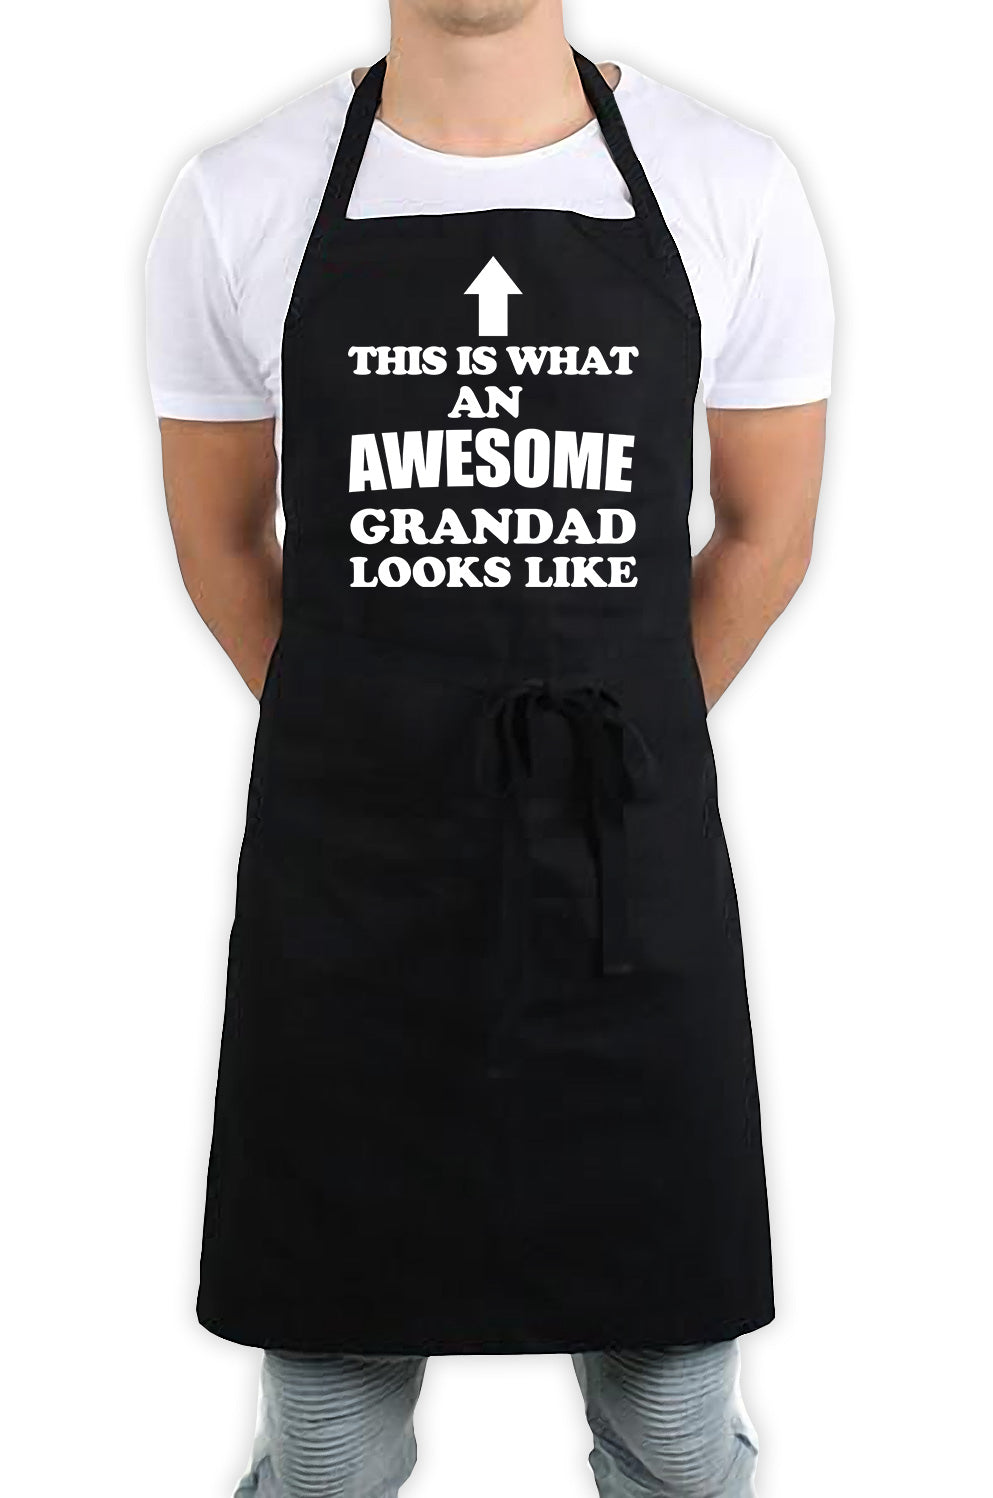 This Is What An Awesome Grandad Looks Like Funny Kitchen BBQ Apron Black